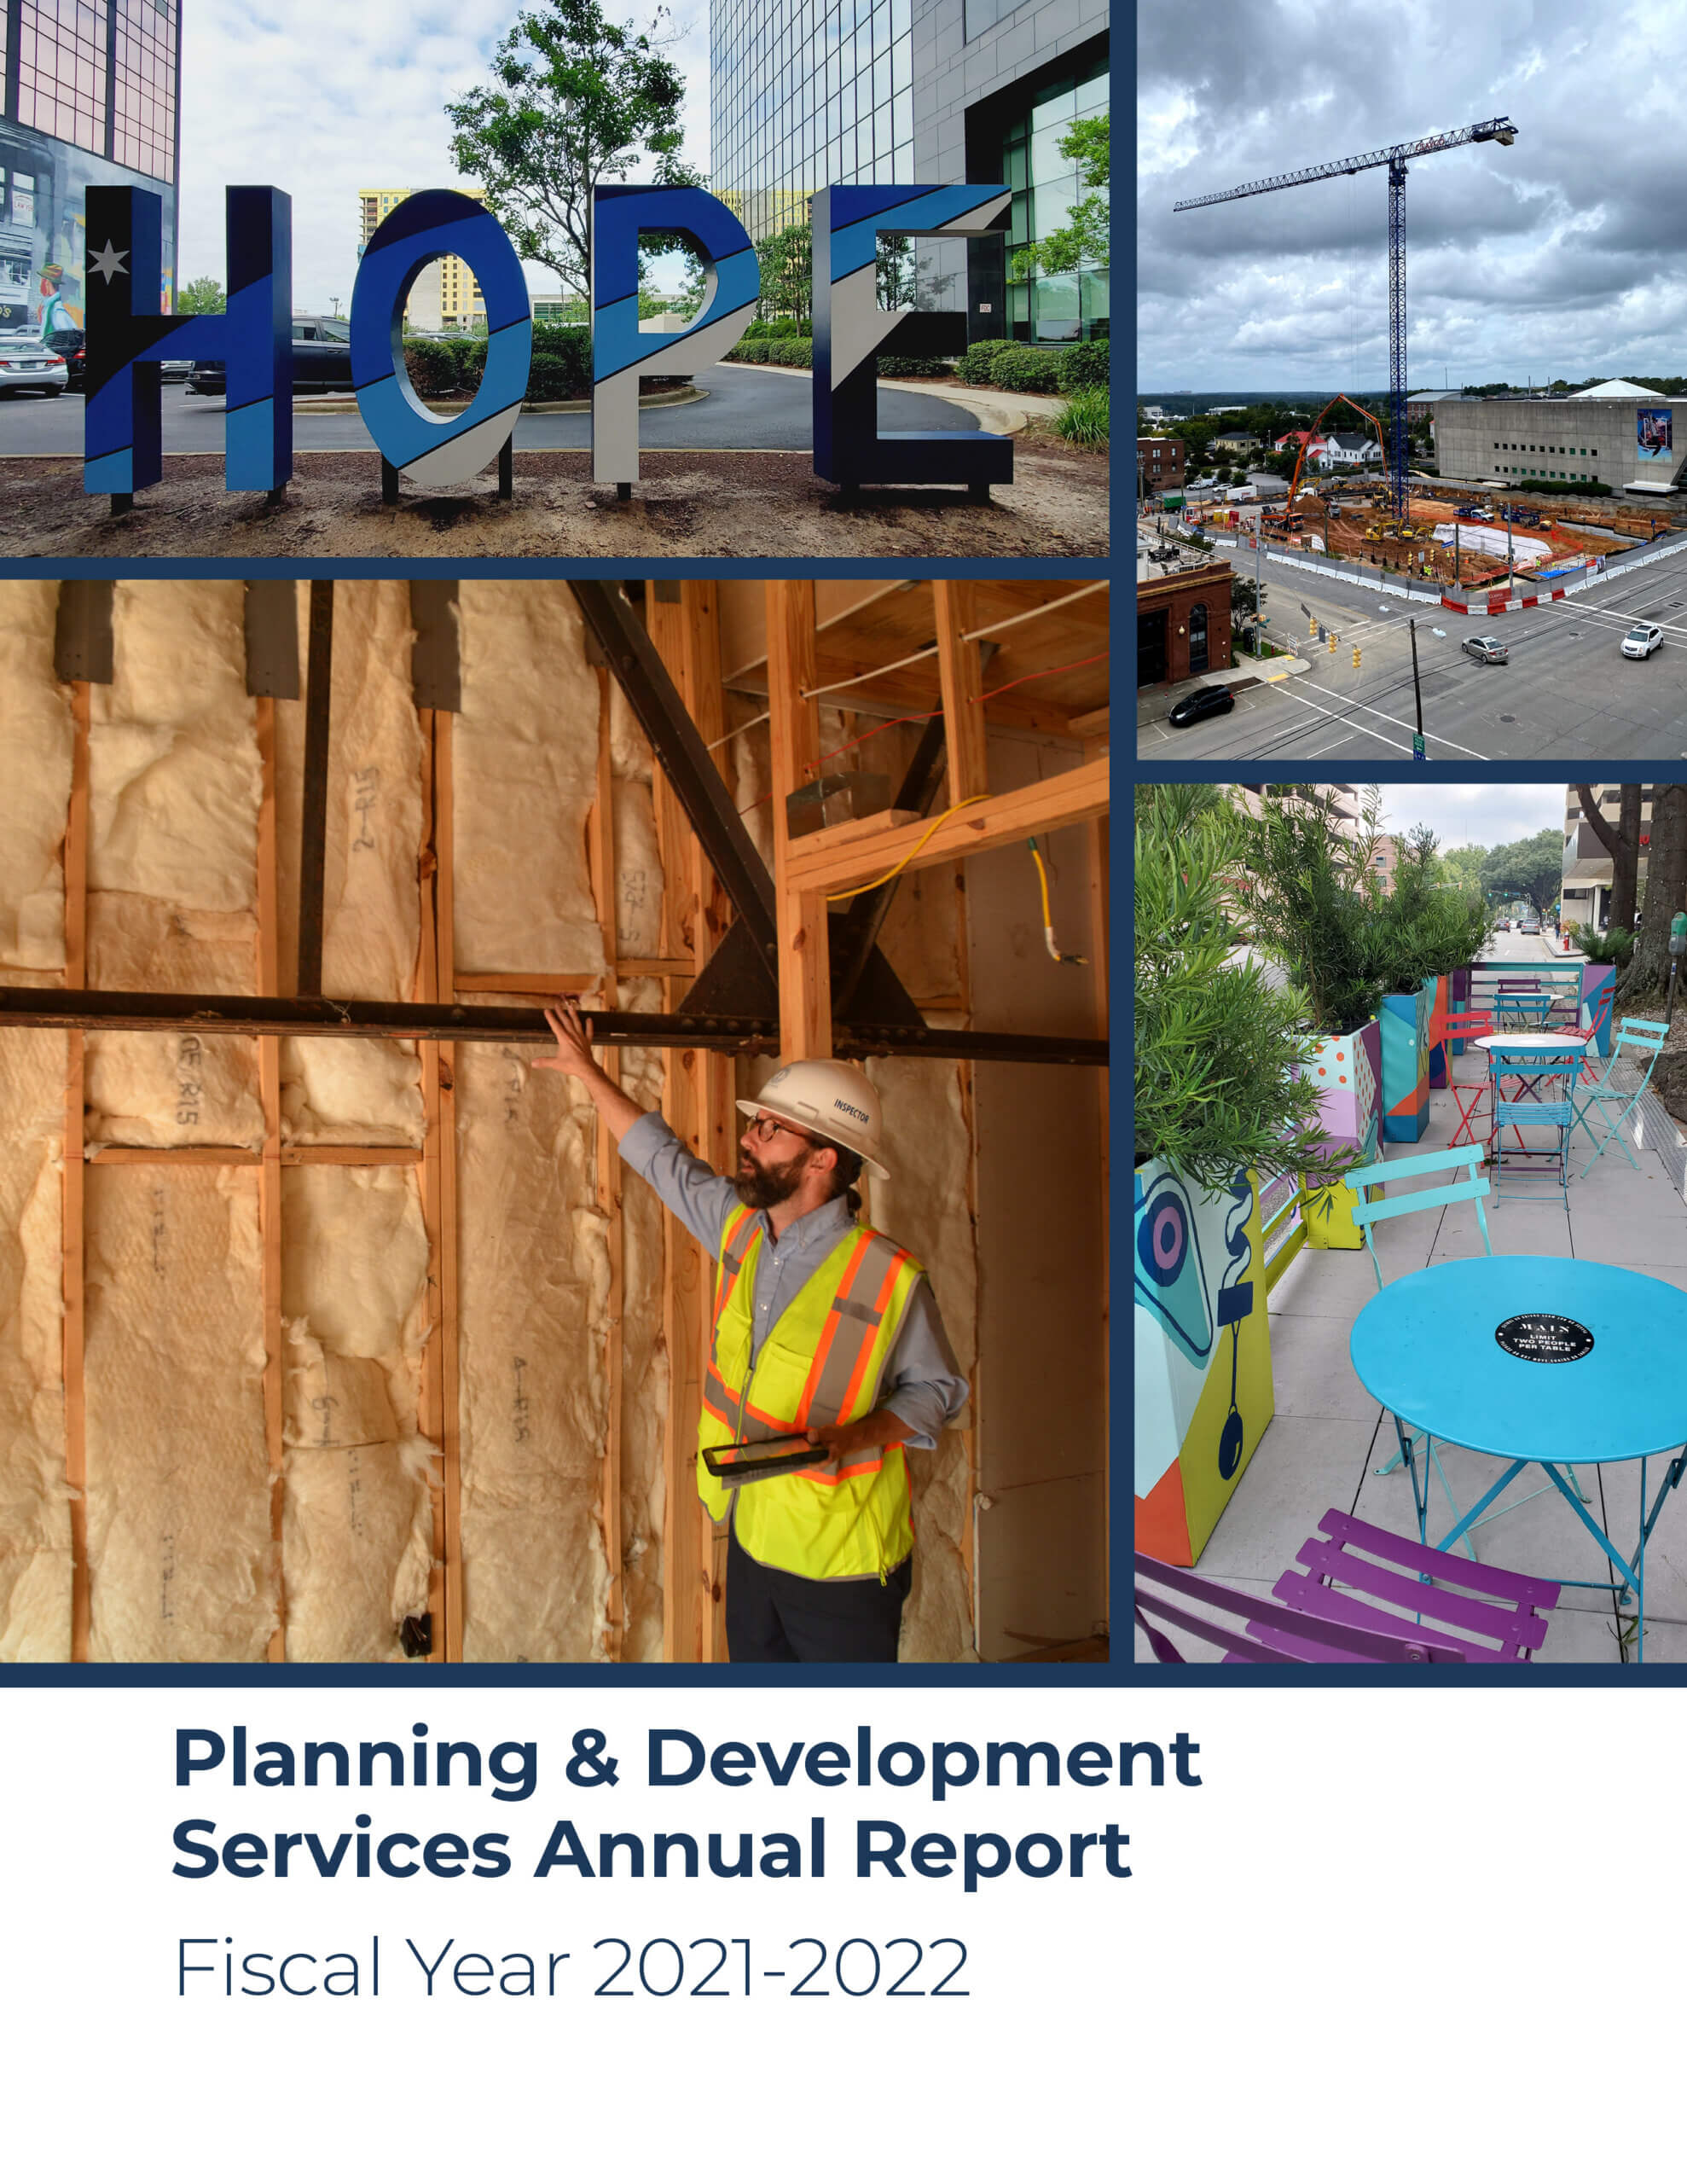 The cover page of the Planning & Development Services Annual Report has four pictures of varying sizes against a navy blue background, clockwise from upper left, of the “HOPE” sculpture on Main Street, a crane at the NW corner of Assembly and Washington Street, colorful seating at the Parklet on Hampton, and a building inspector holding an ipad and pointing to a structural beam above his head. Below the pictures is the text “Planning & Development Services Annual Report Fiscal Year 2021-2022” in navy, against a white background.